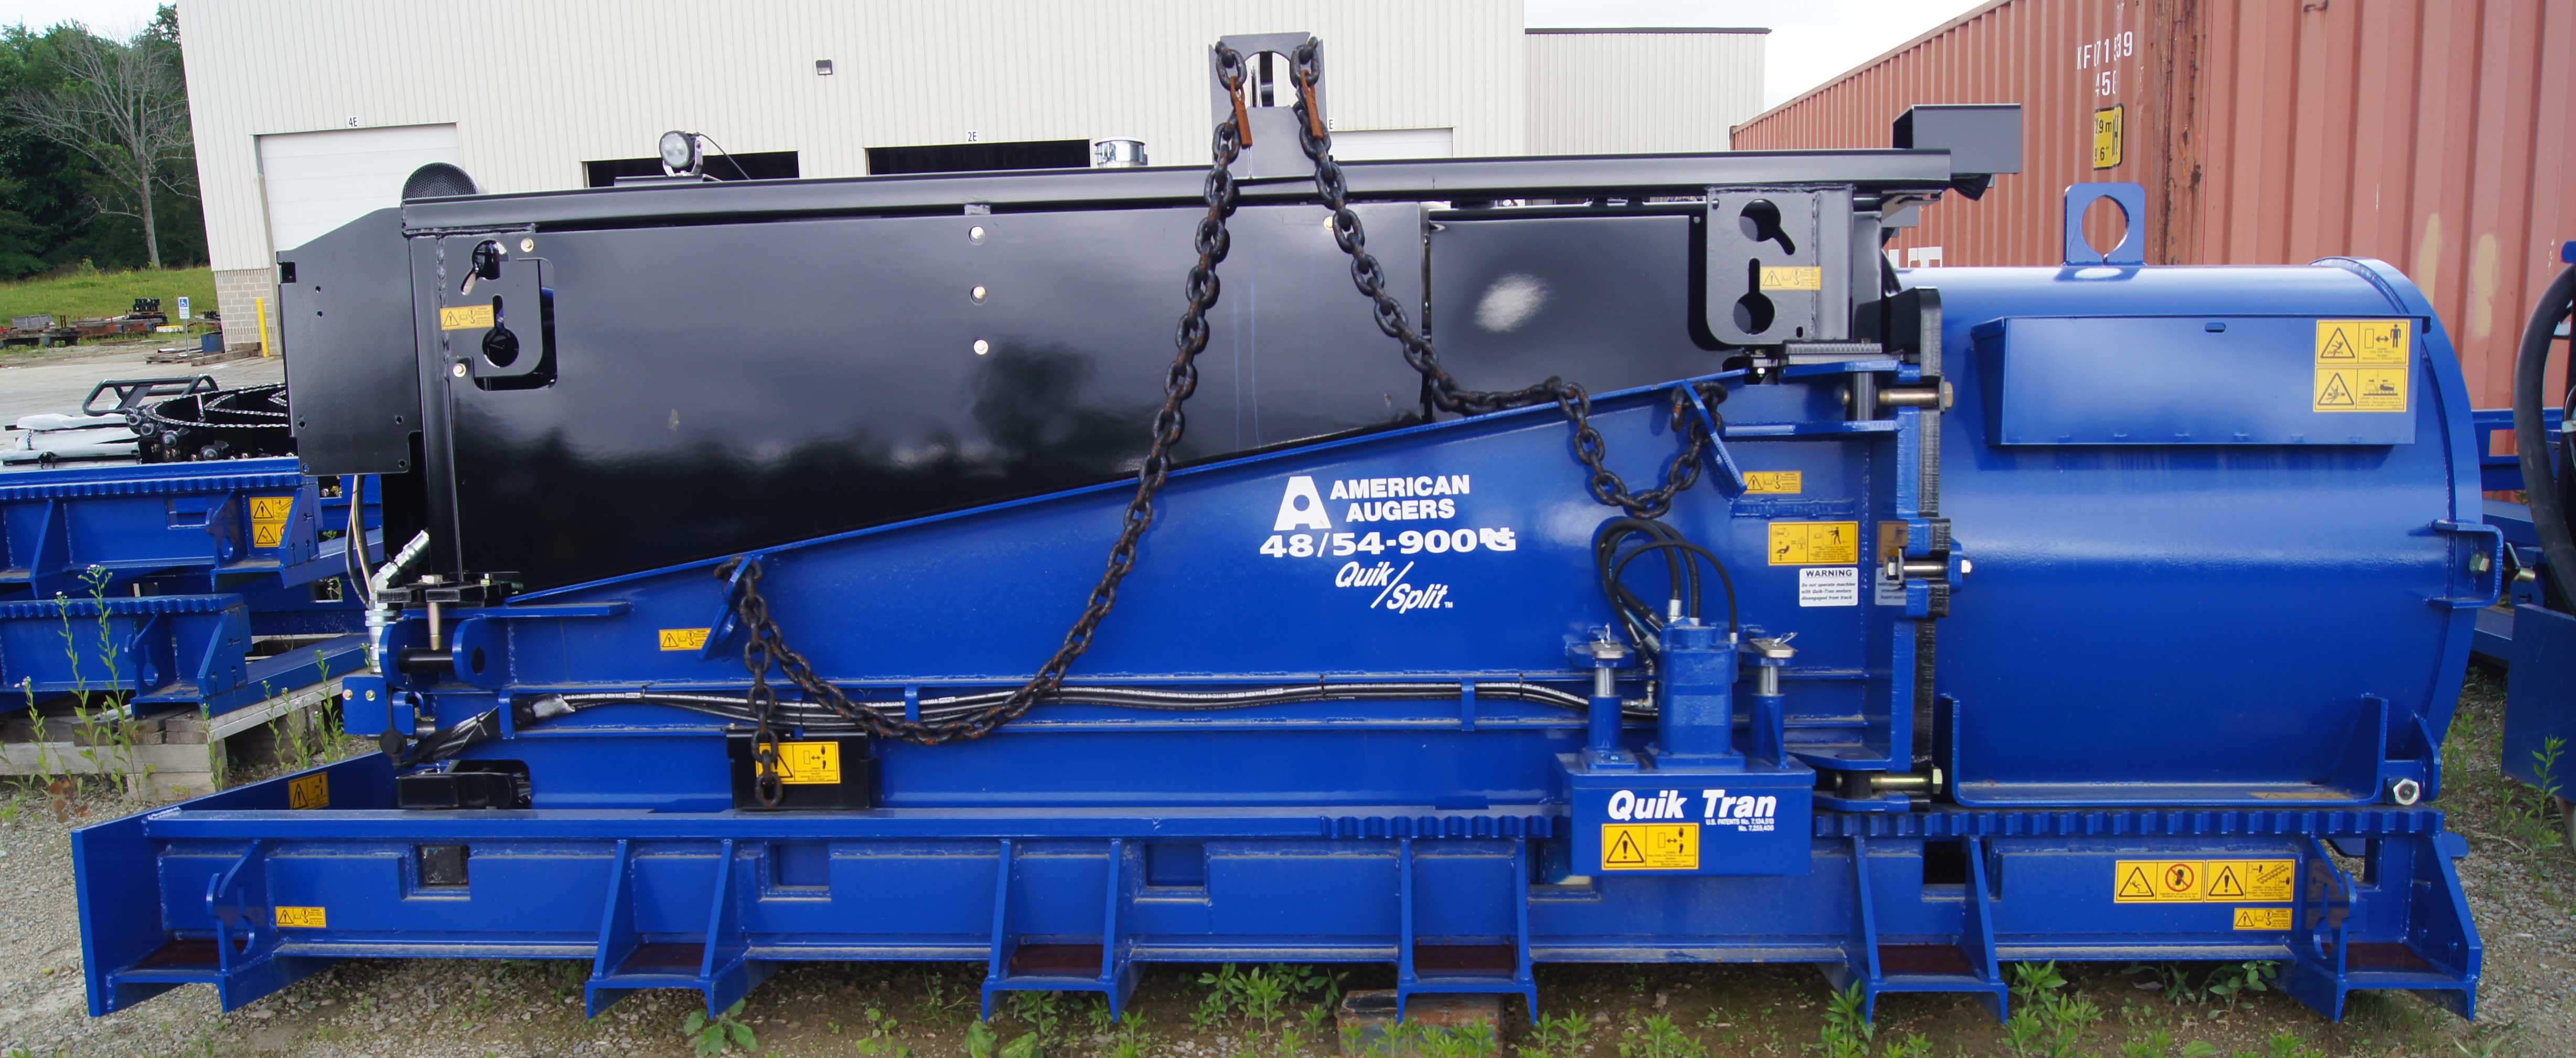 American Augers 48/54-900